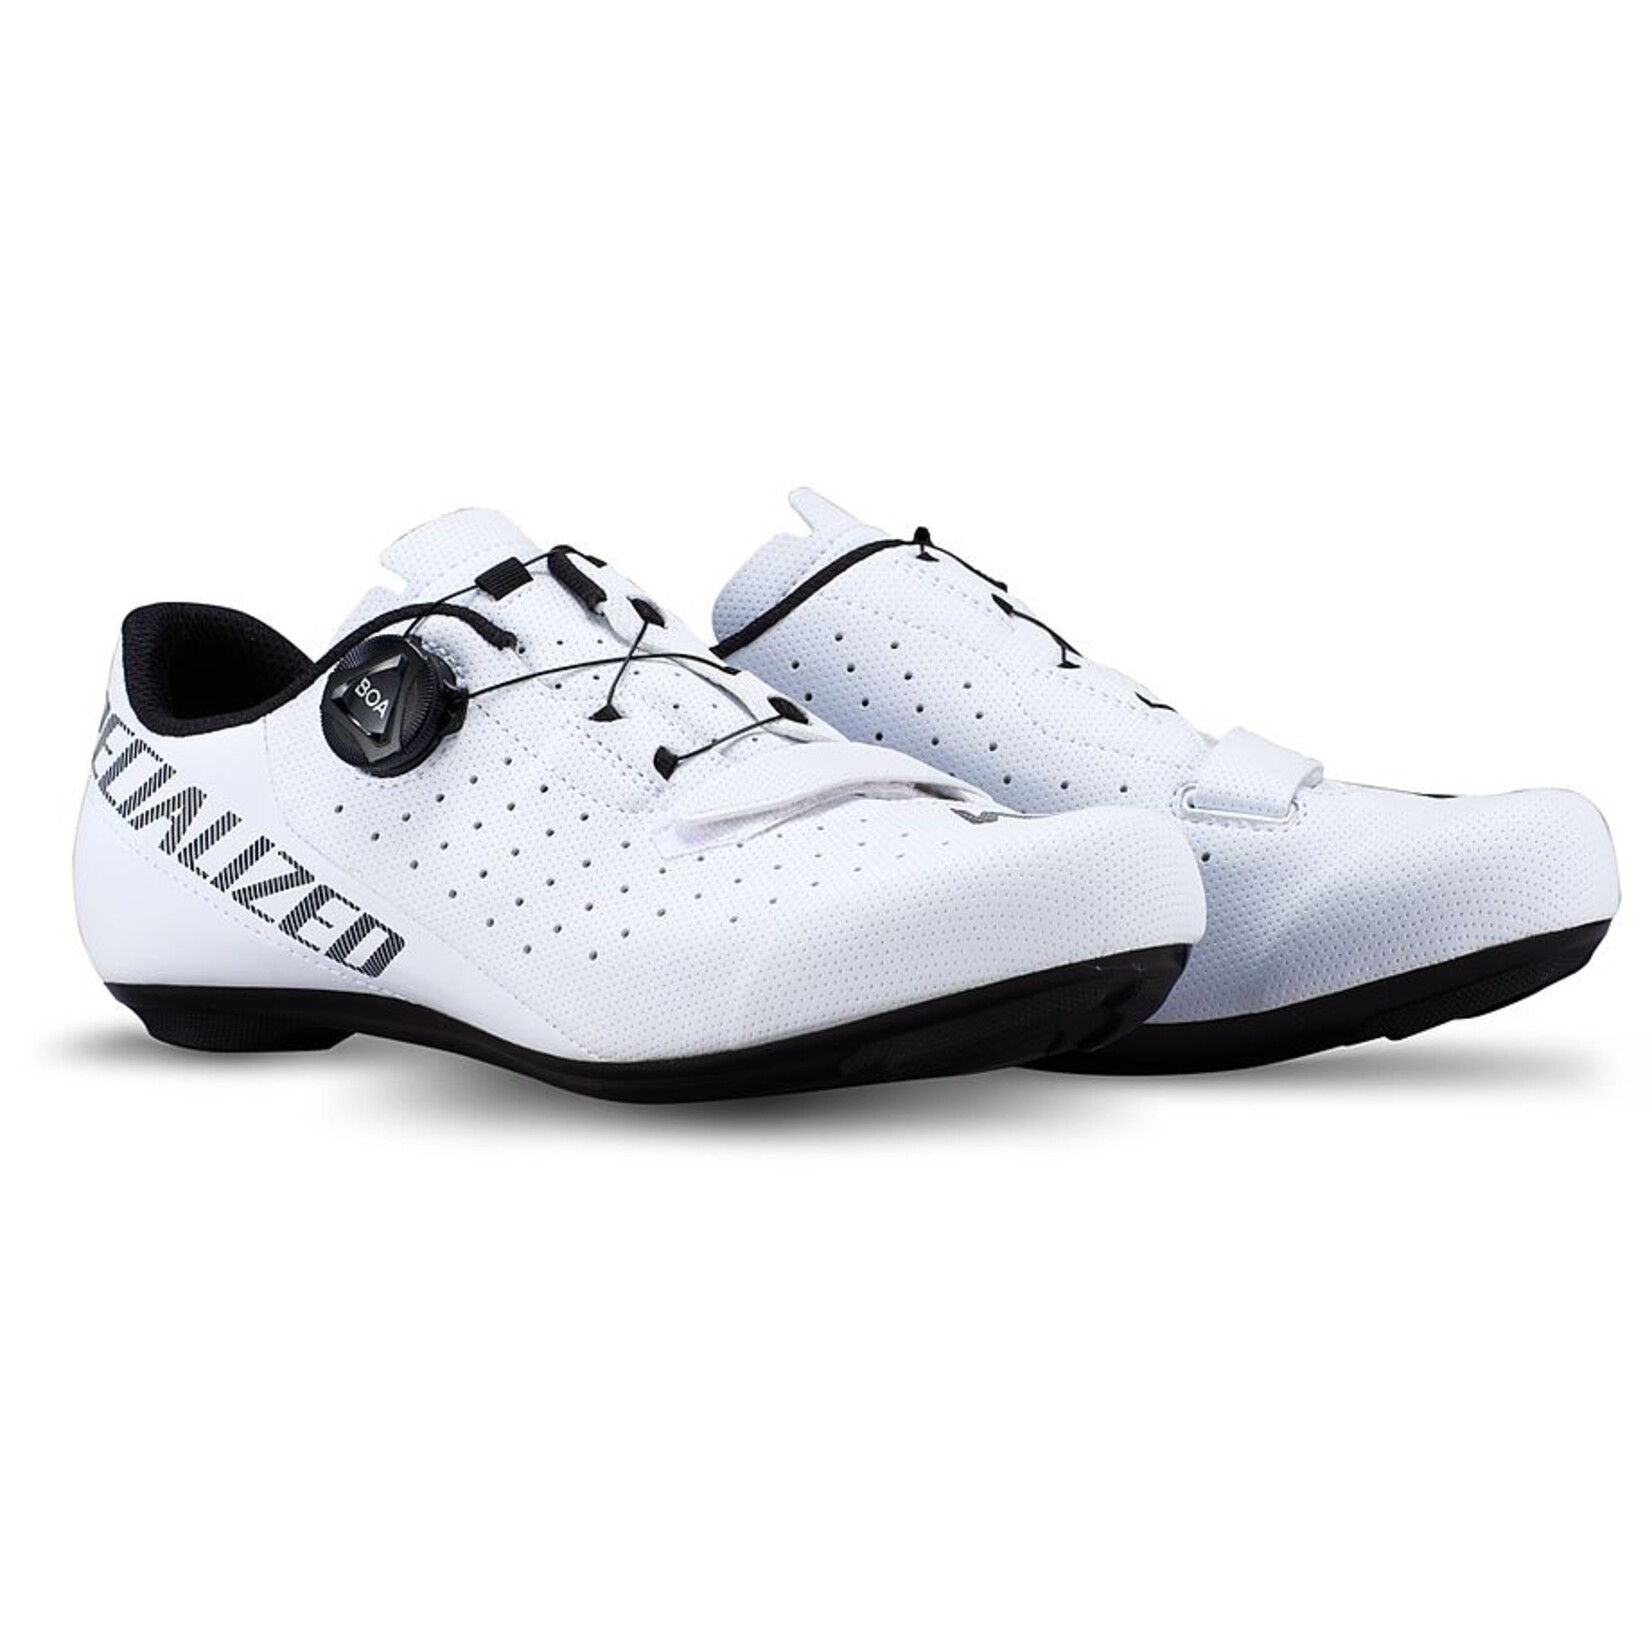 Specialized Torch 1.0 Road Shoes in White